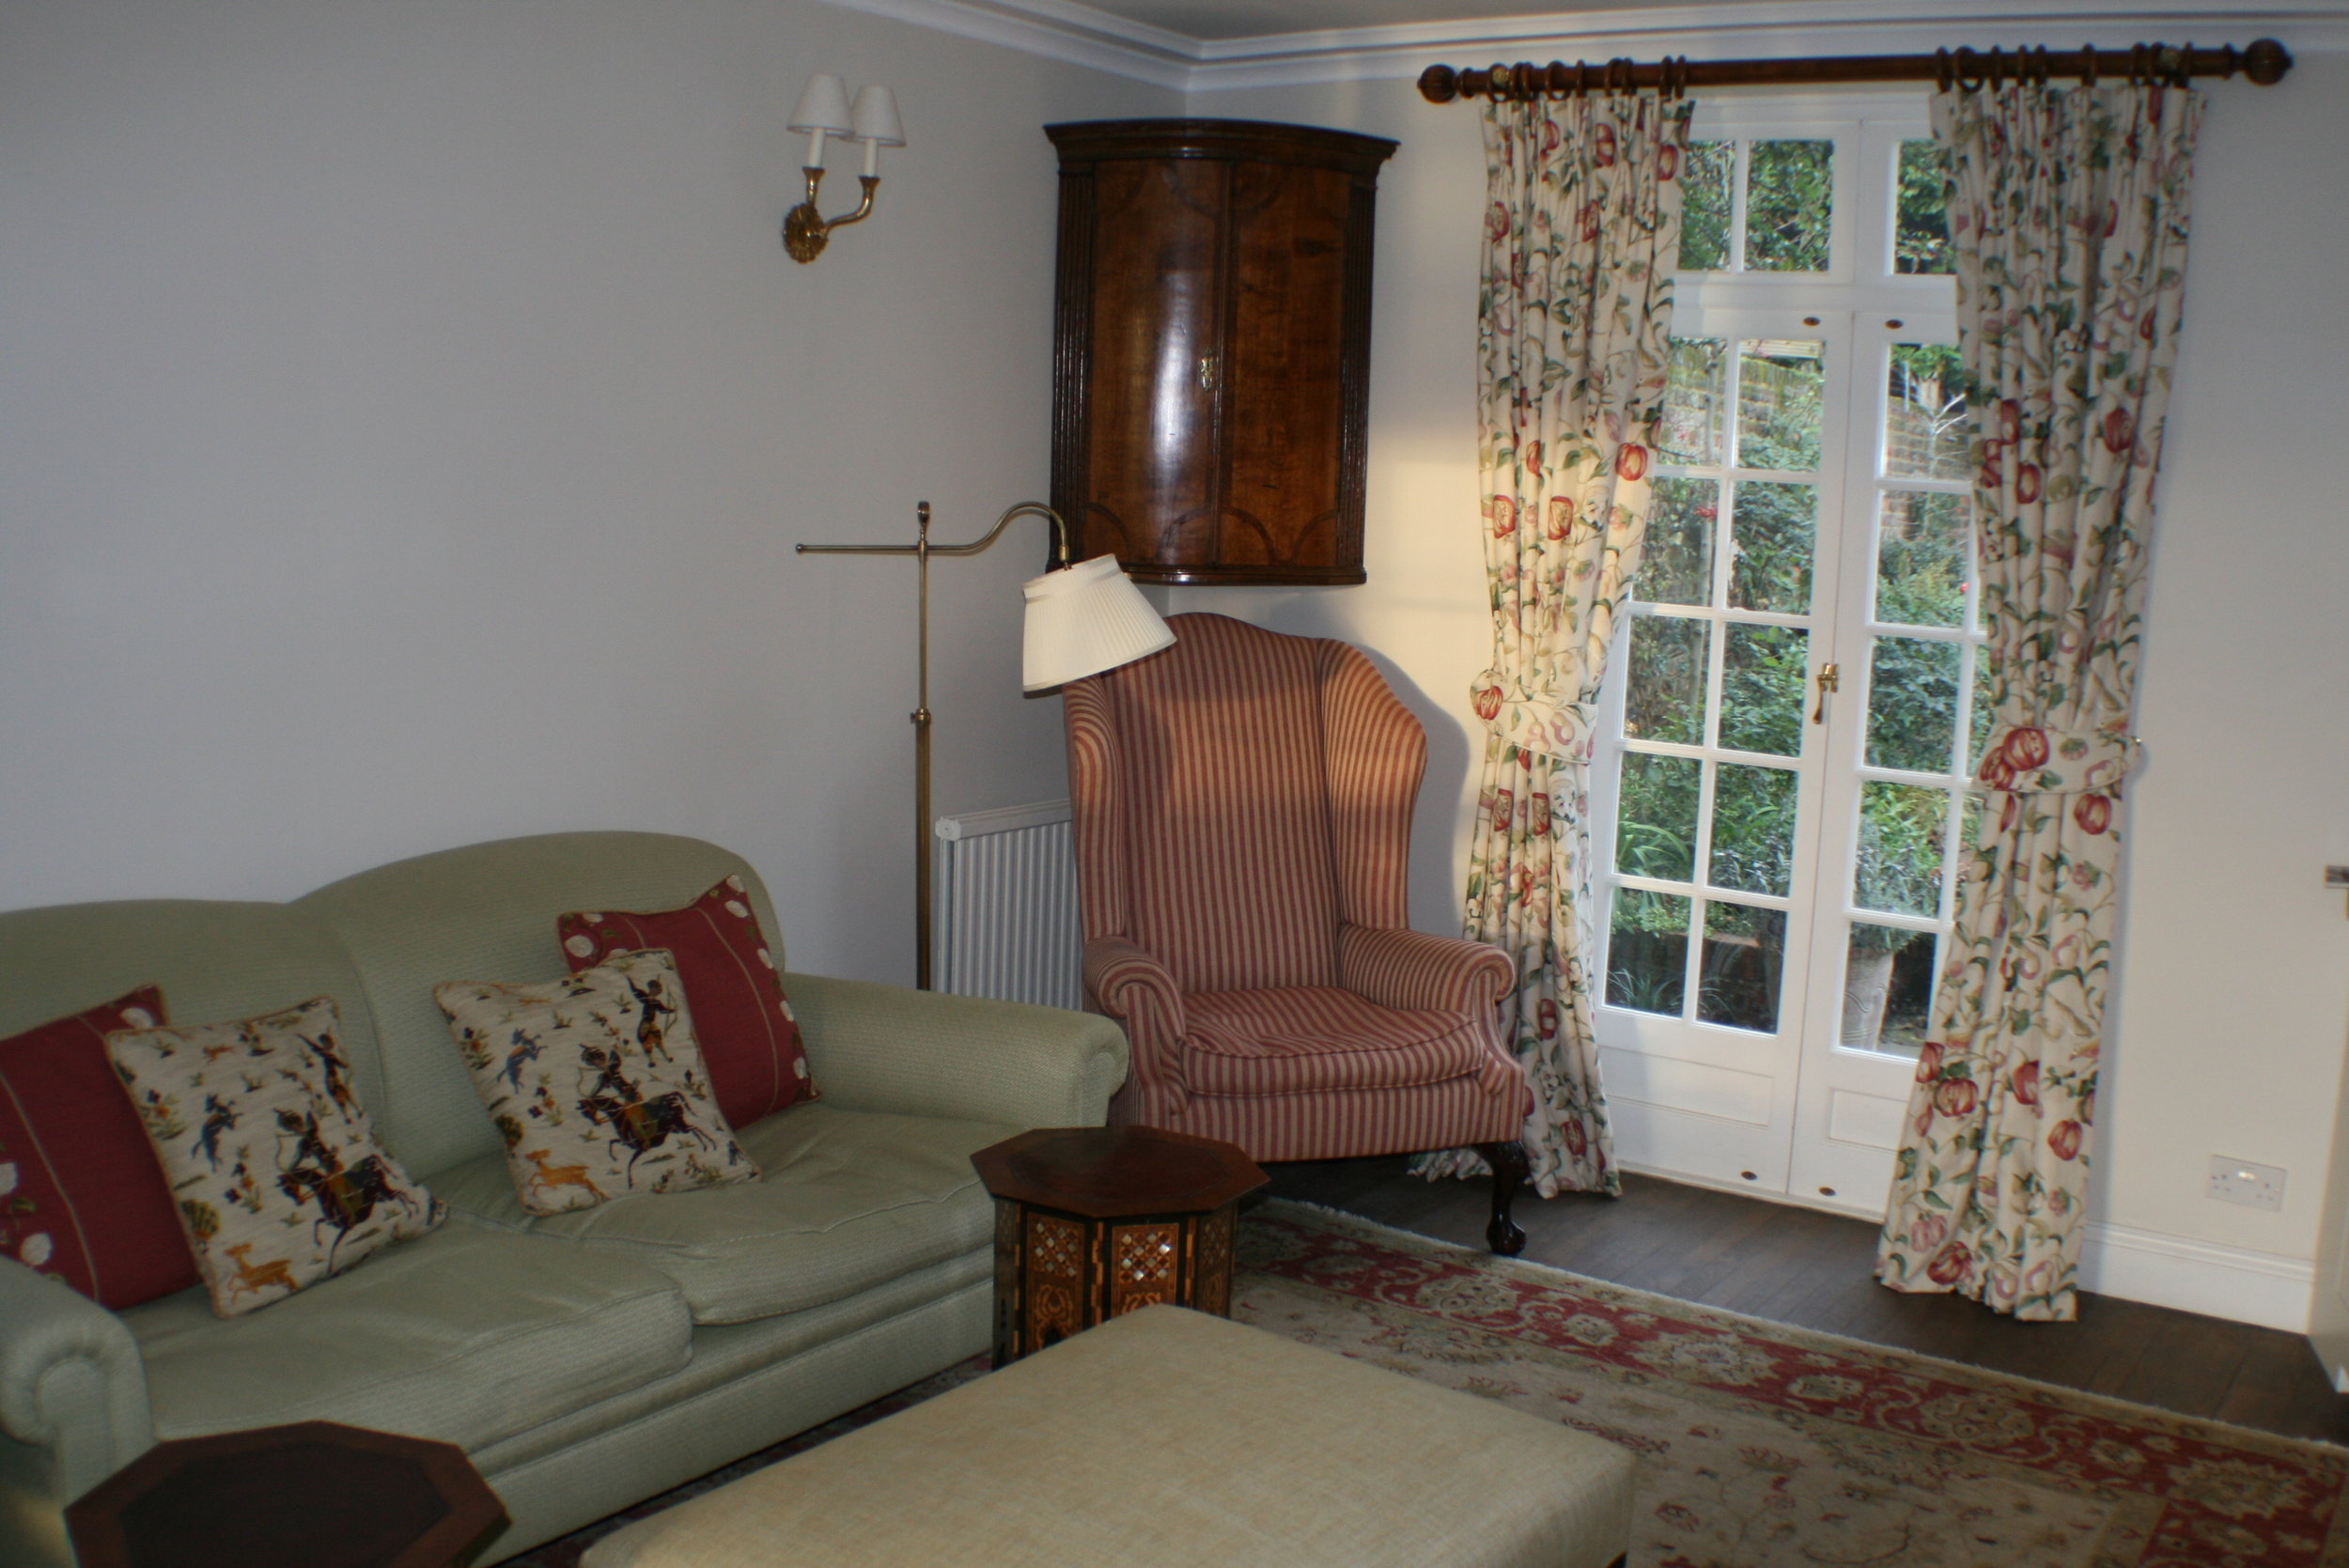 sofa and wing chair.jpg